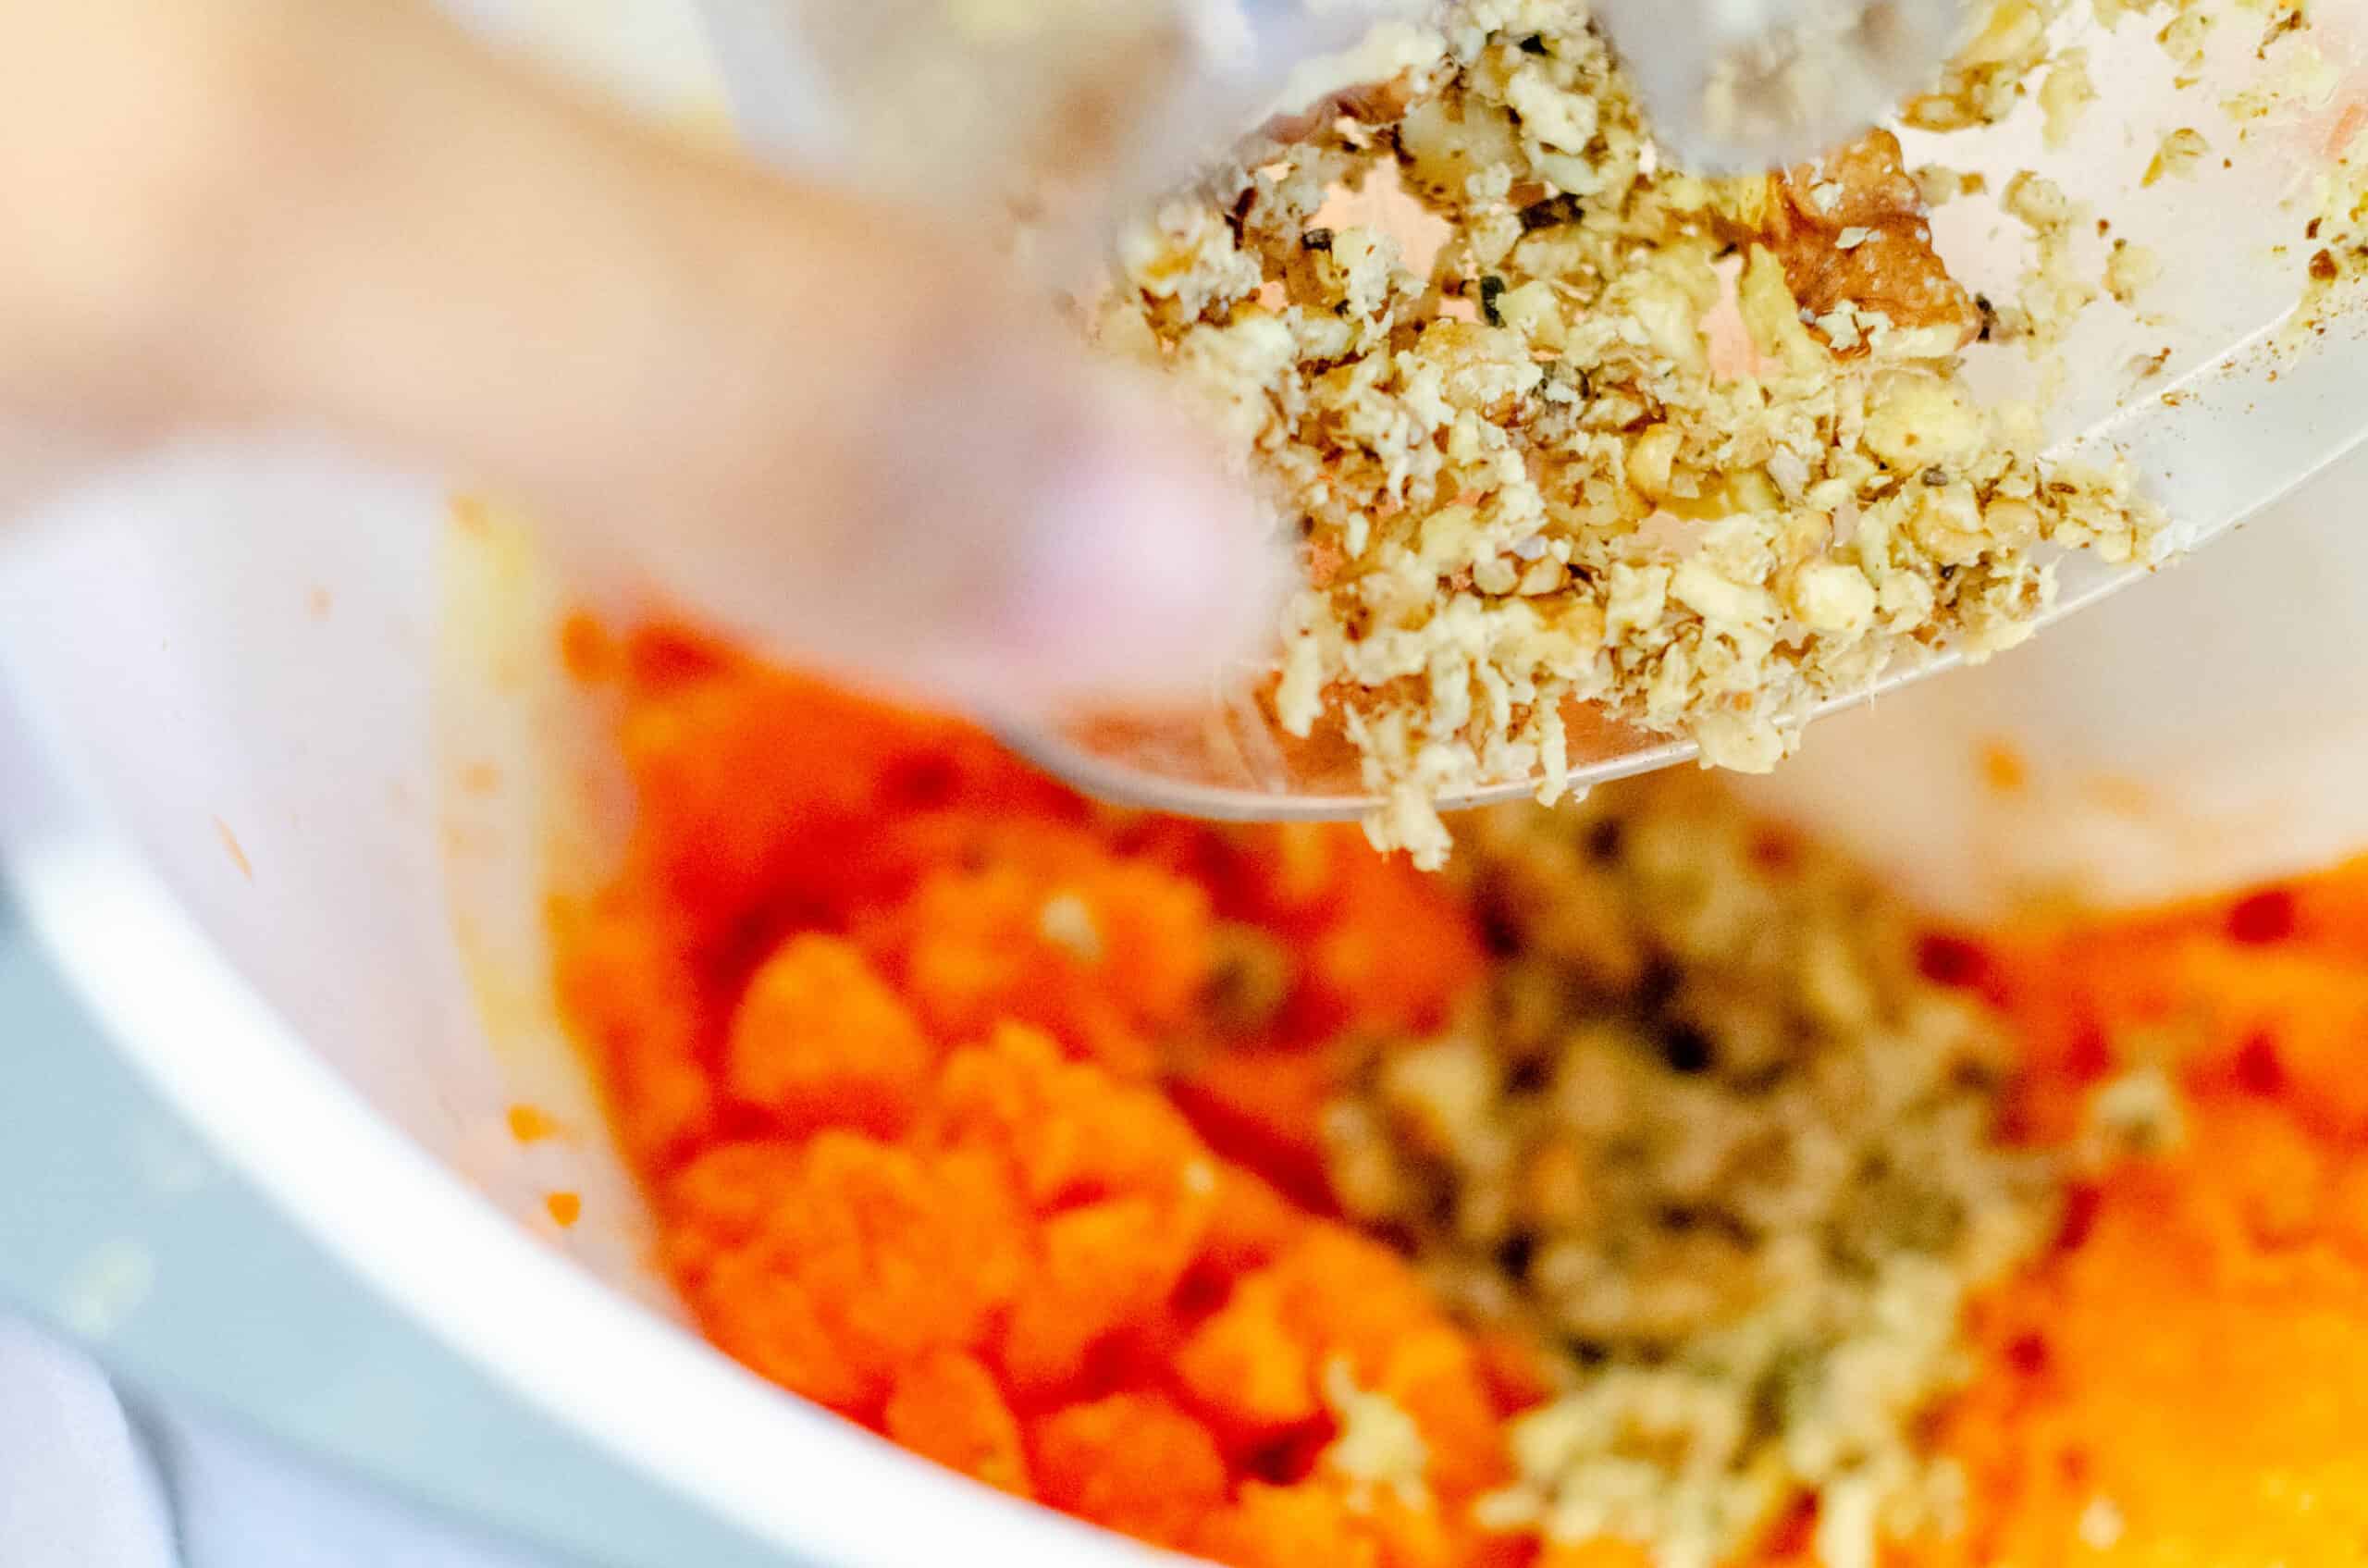 Adding walnuts to grated carrot.